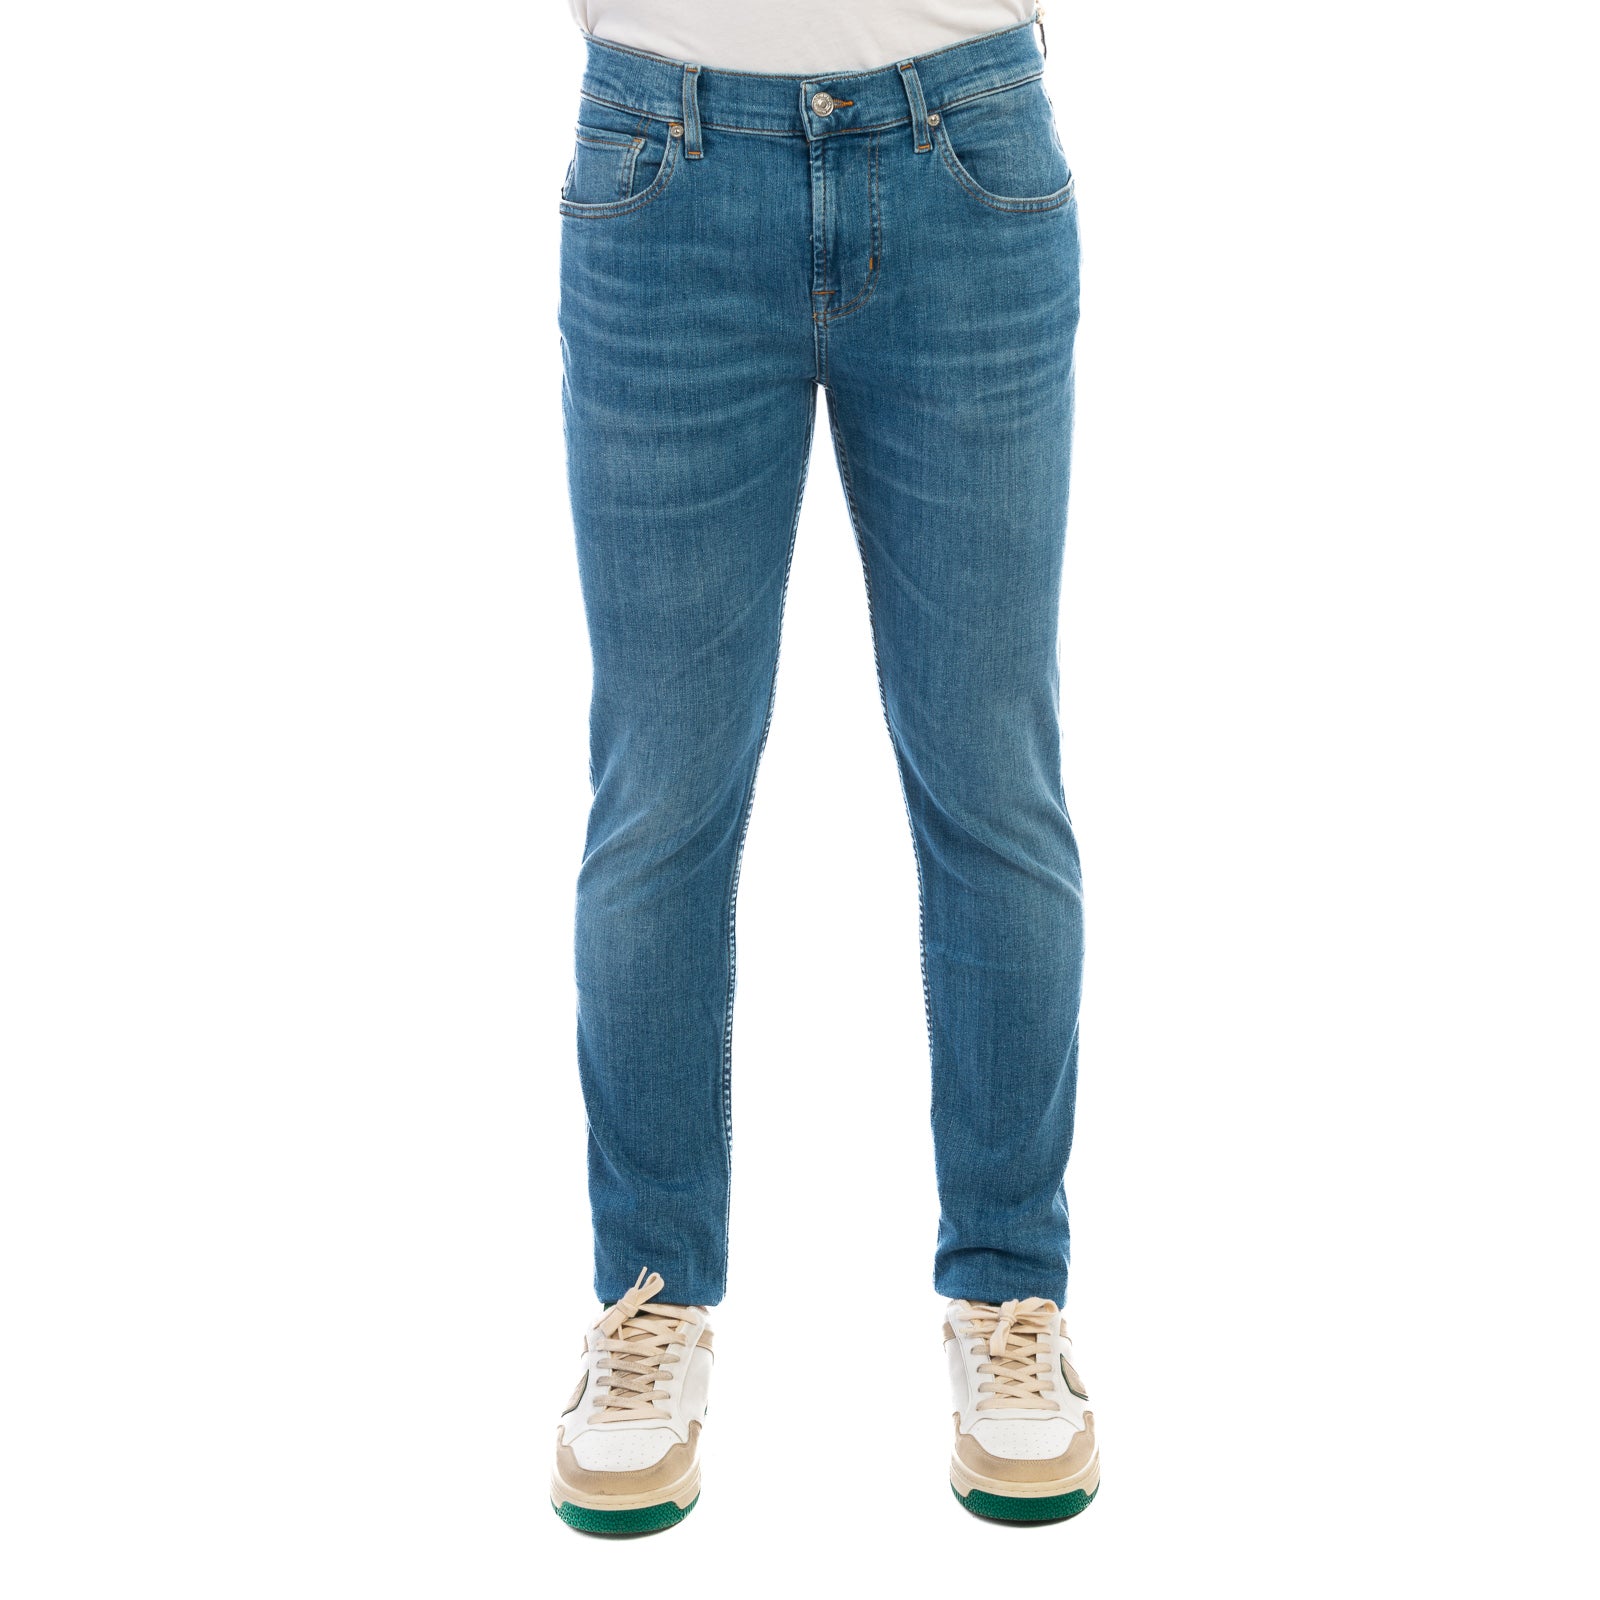 Jeans 7 FOR ALL MANKIND
Light blu